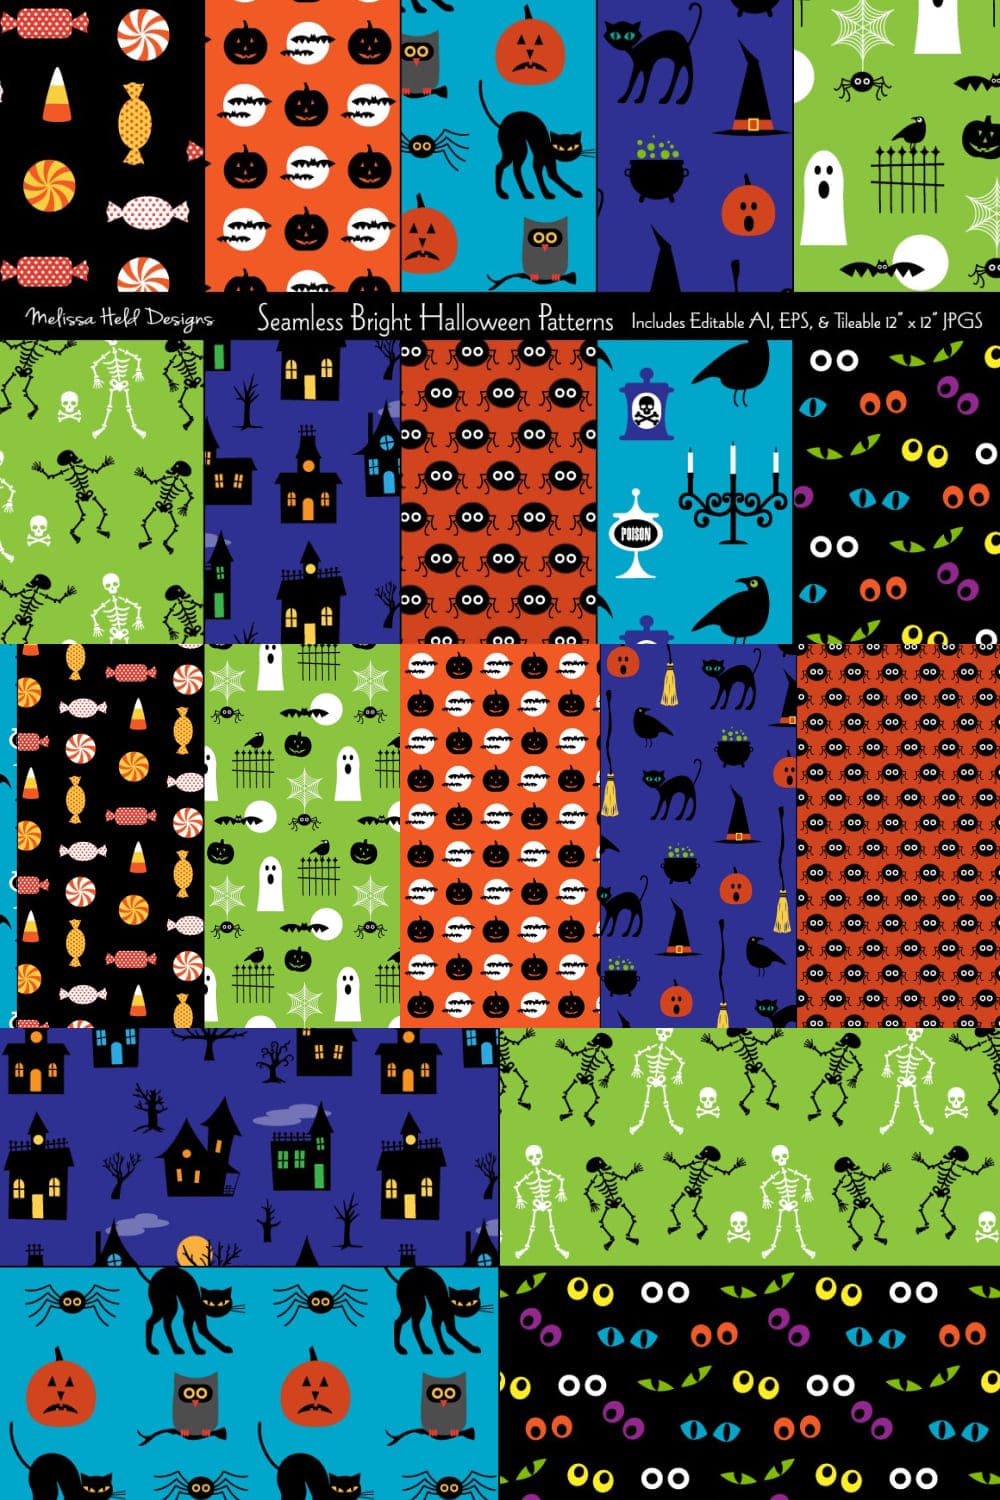 Seamless Bright Halloween Patterns - pinterest image preview.